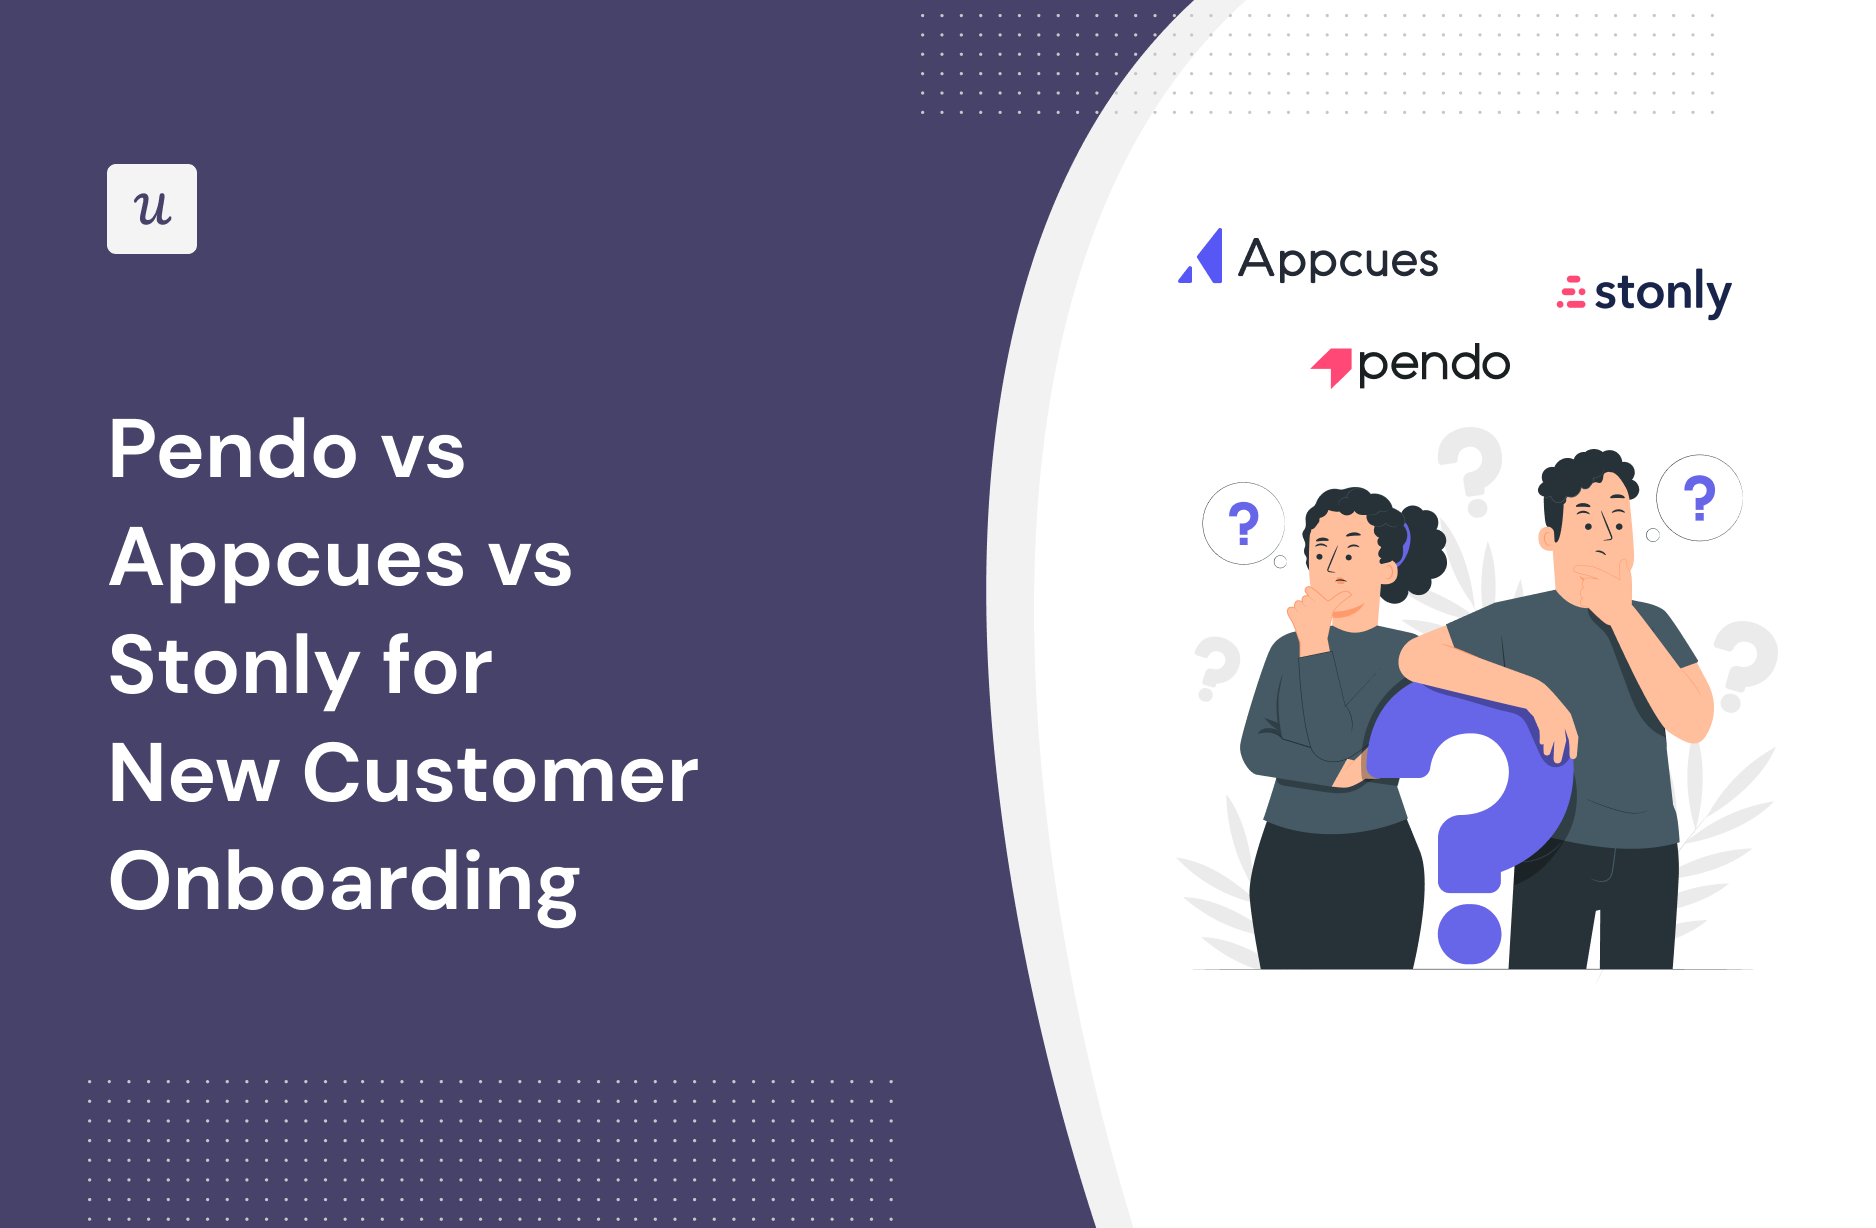 Pendo vs Appcues vs Stonly for New Customer Onboarding